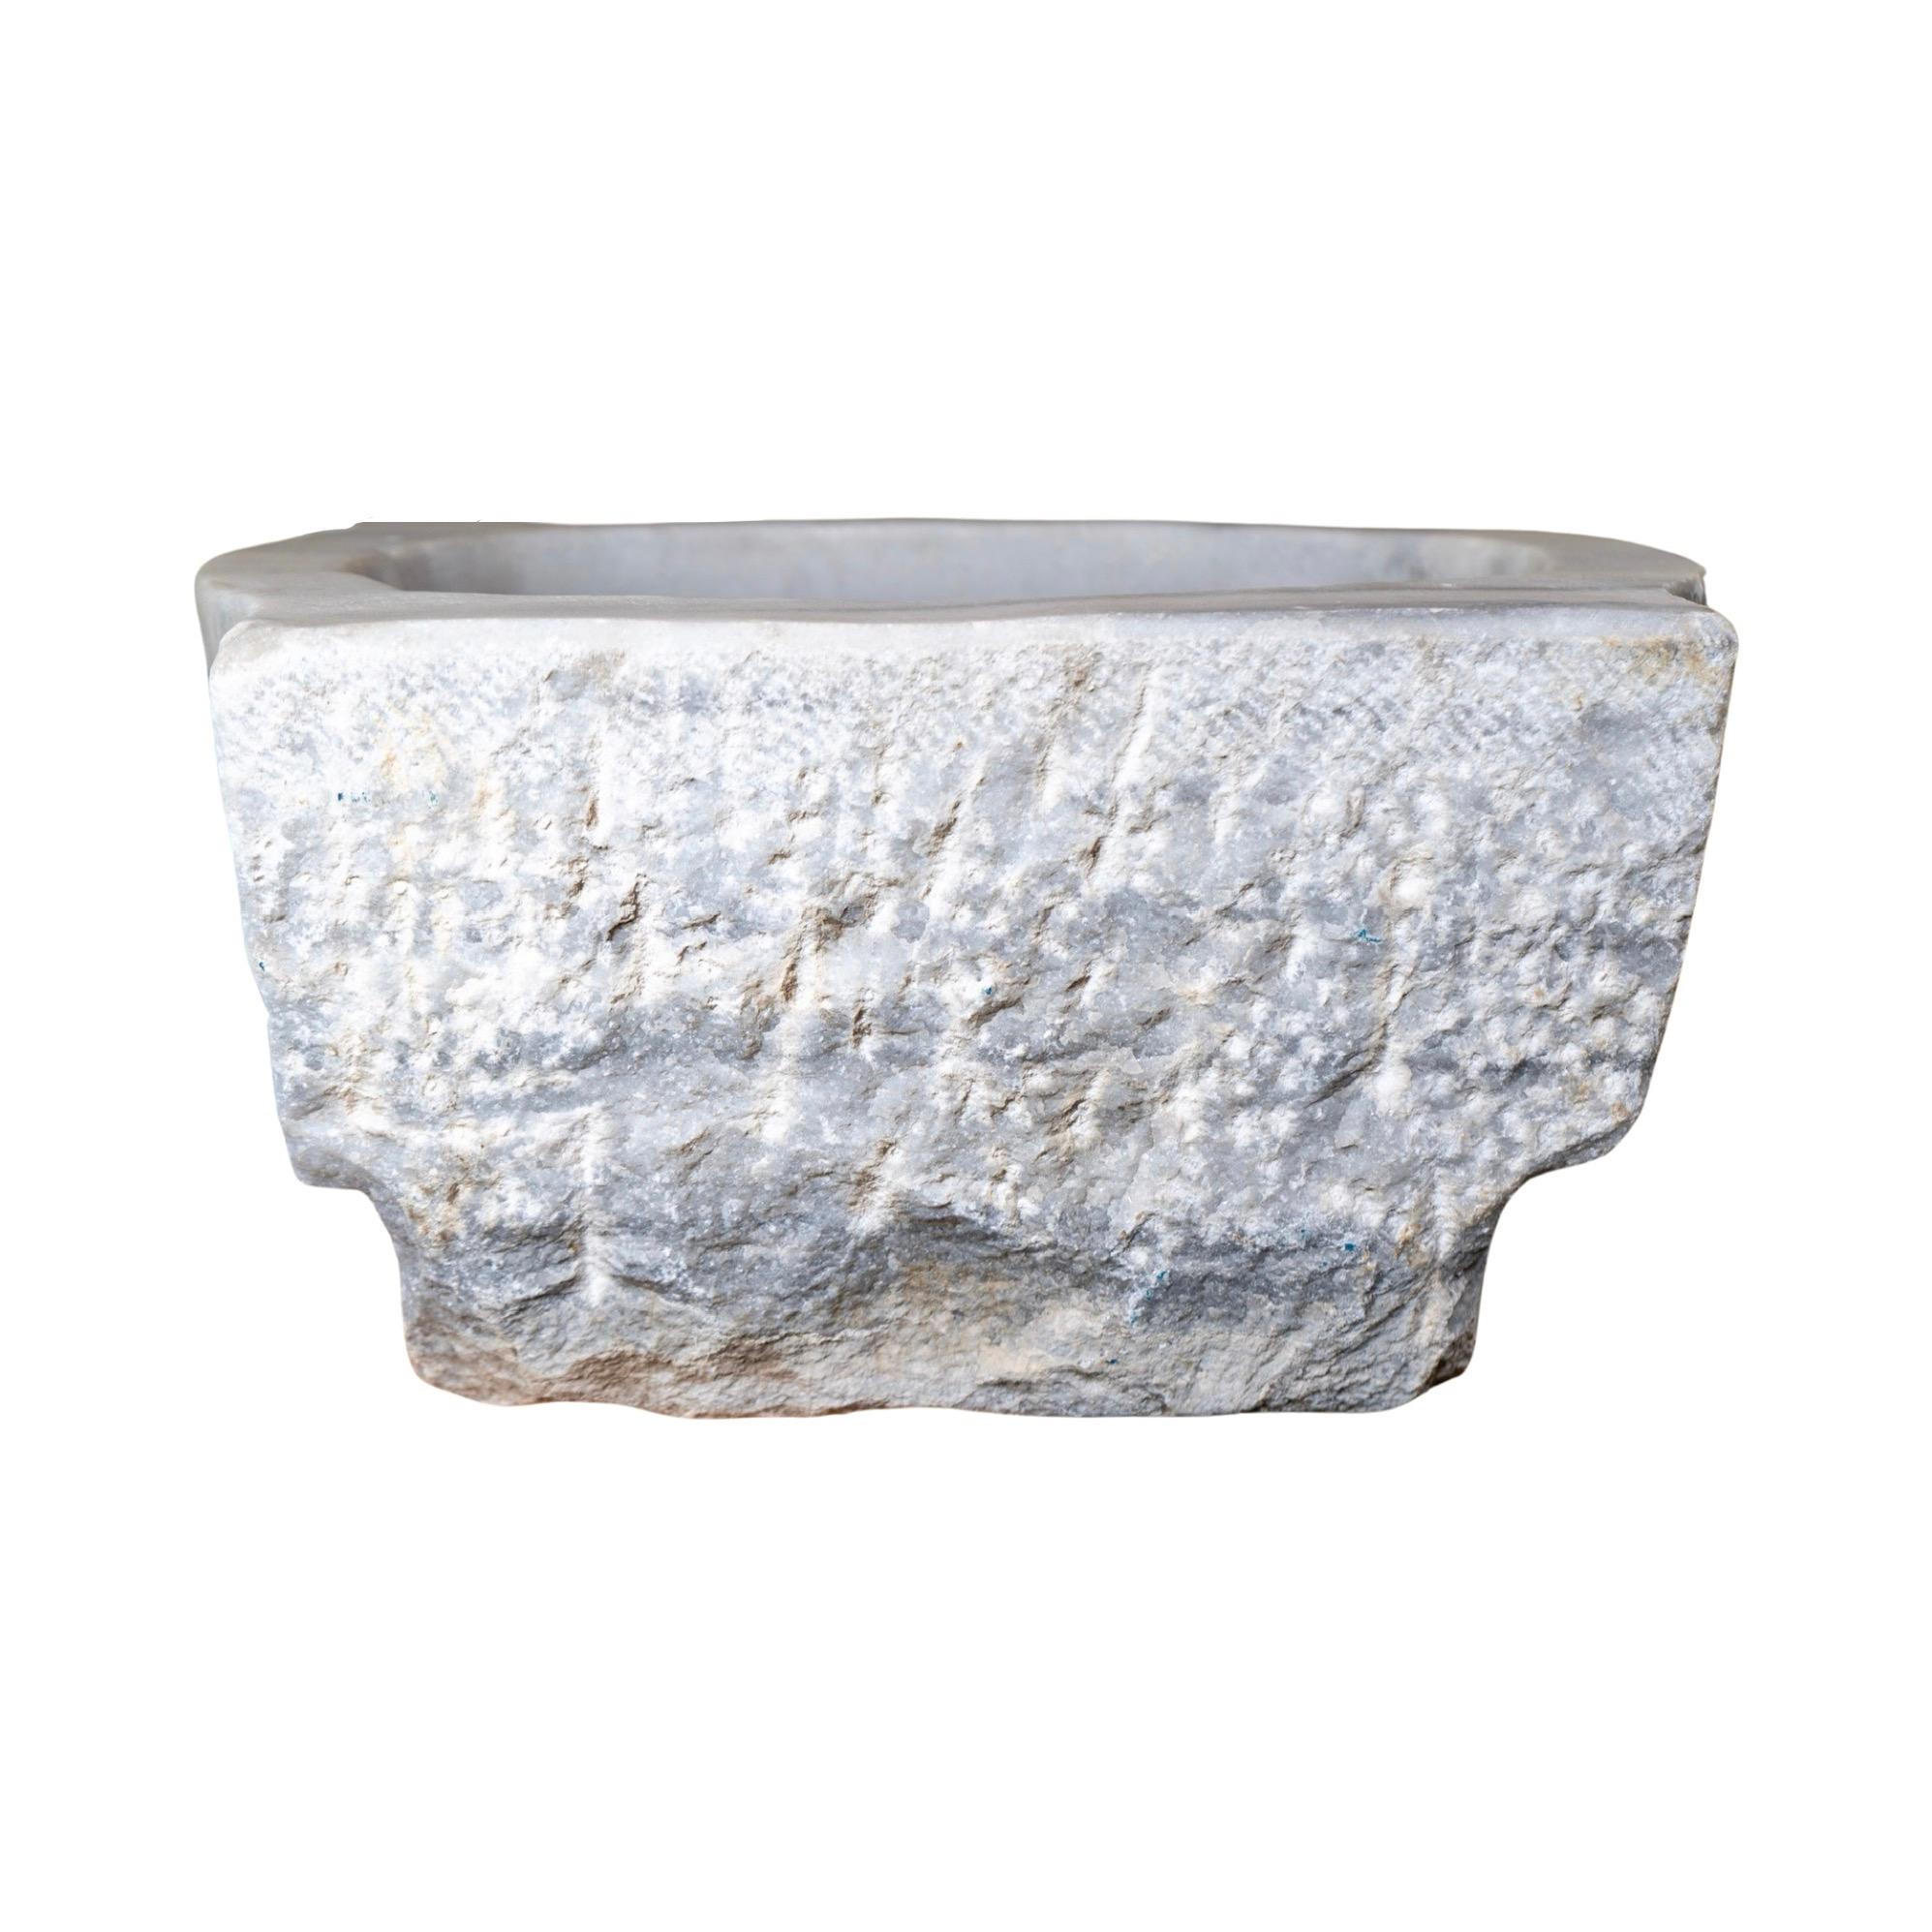 Mid-19th Century Greek White Marble Sink For Sale 4